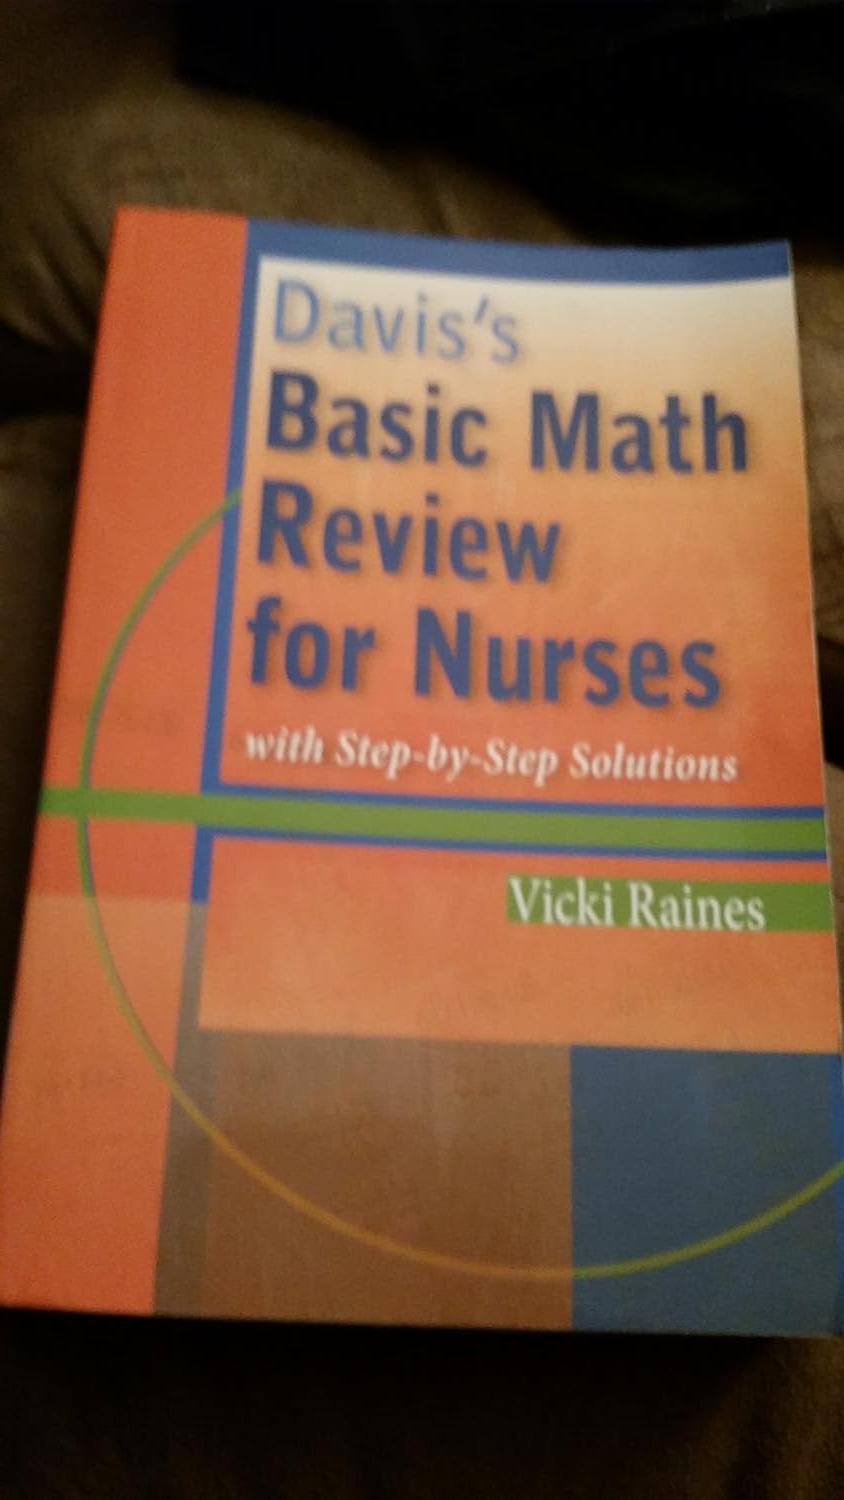 daviss basic math review for nurses with step by step solutions 1st edition vicki raines 080362056x,